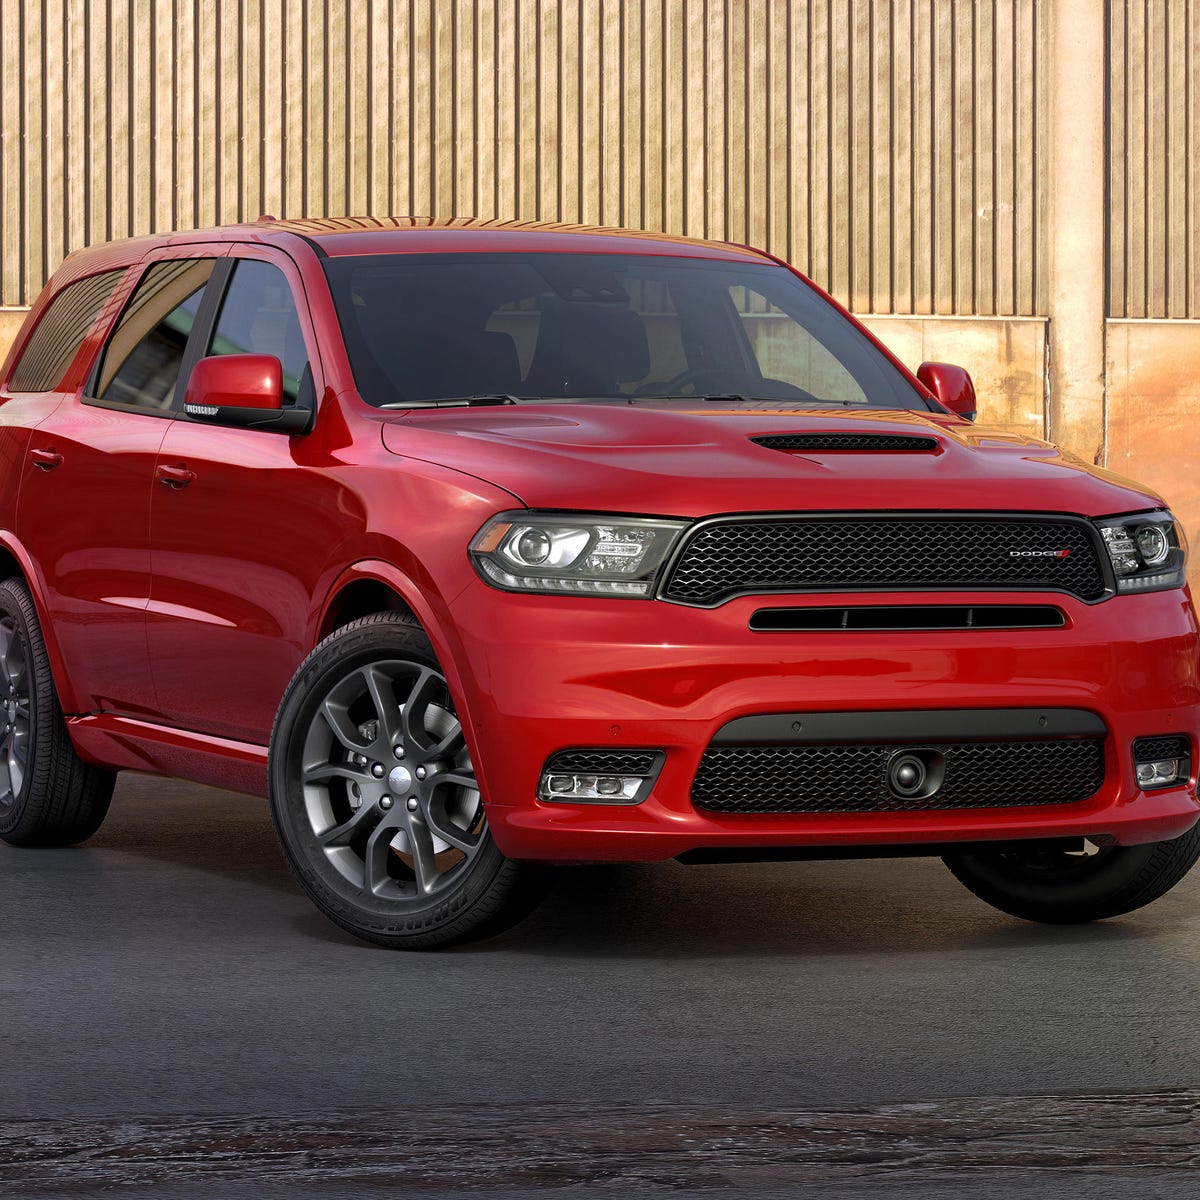 Dodge Durango SRT lends its look to R/T model for 2018 - CNET